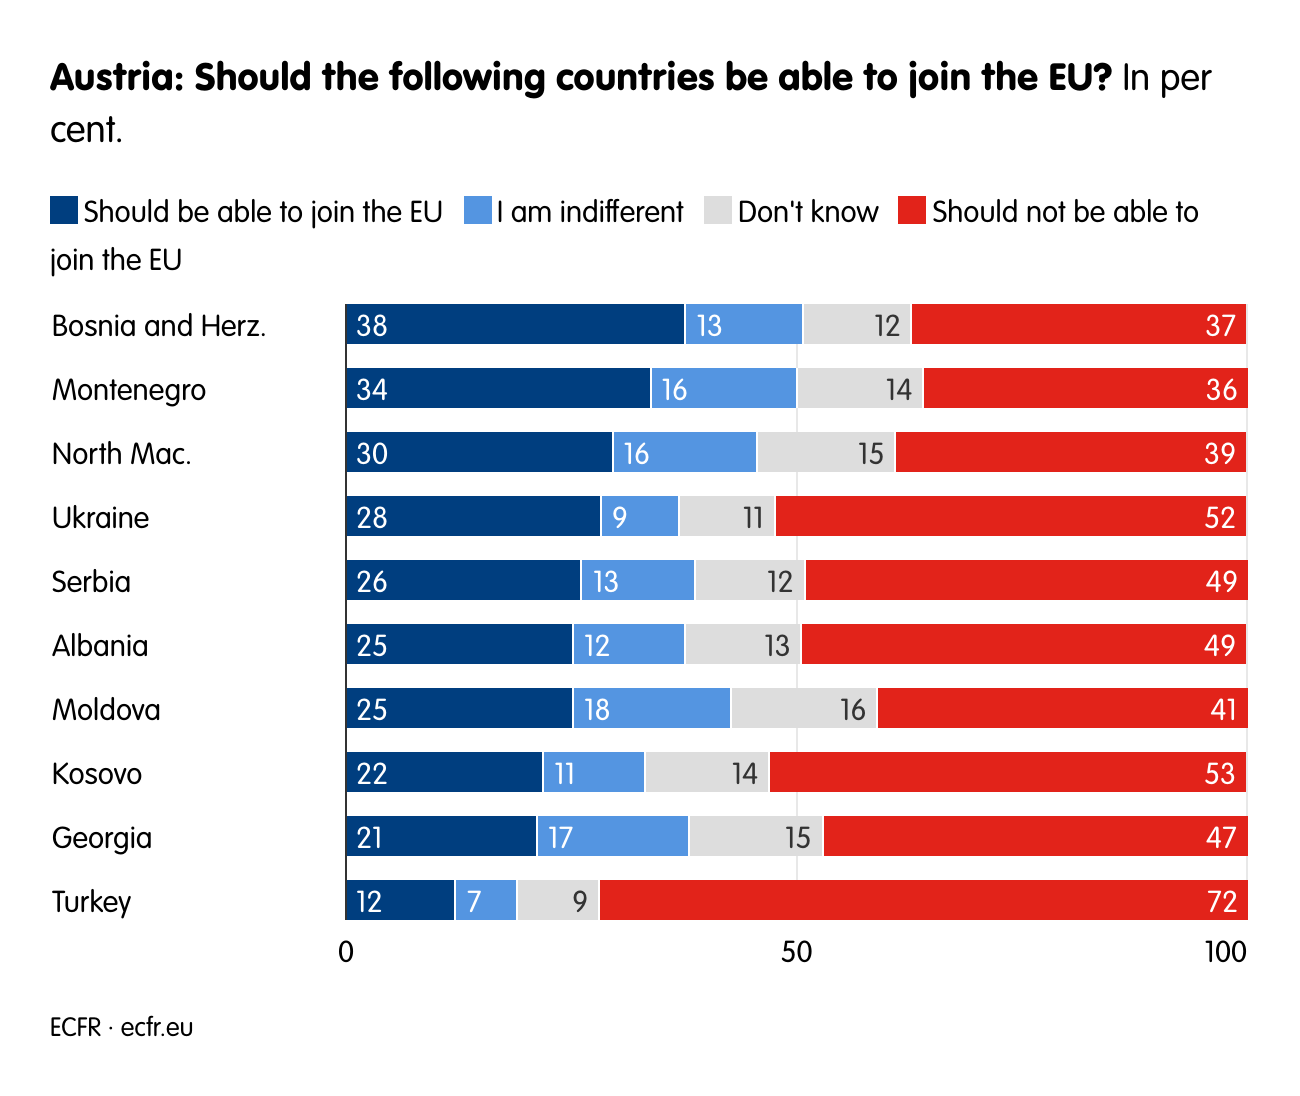 Austria: Should the following countries be able to join the EU?